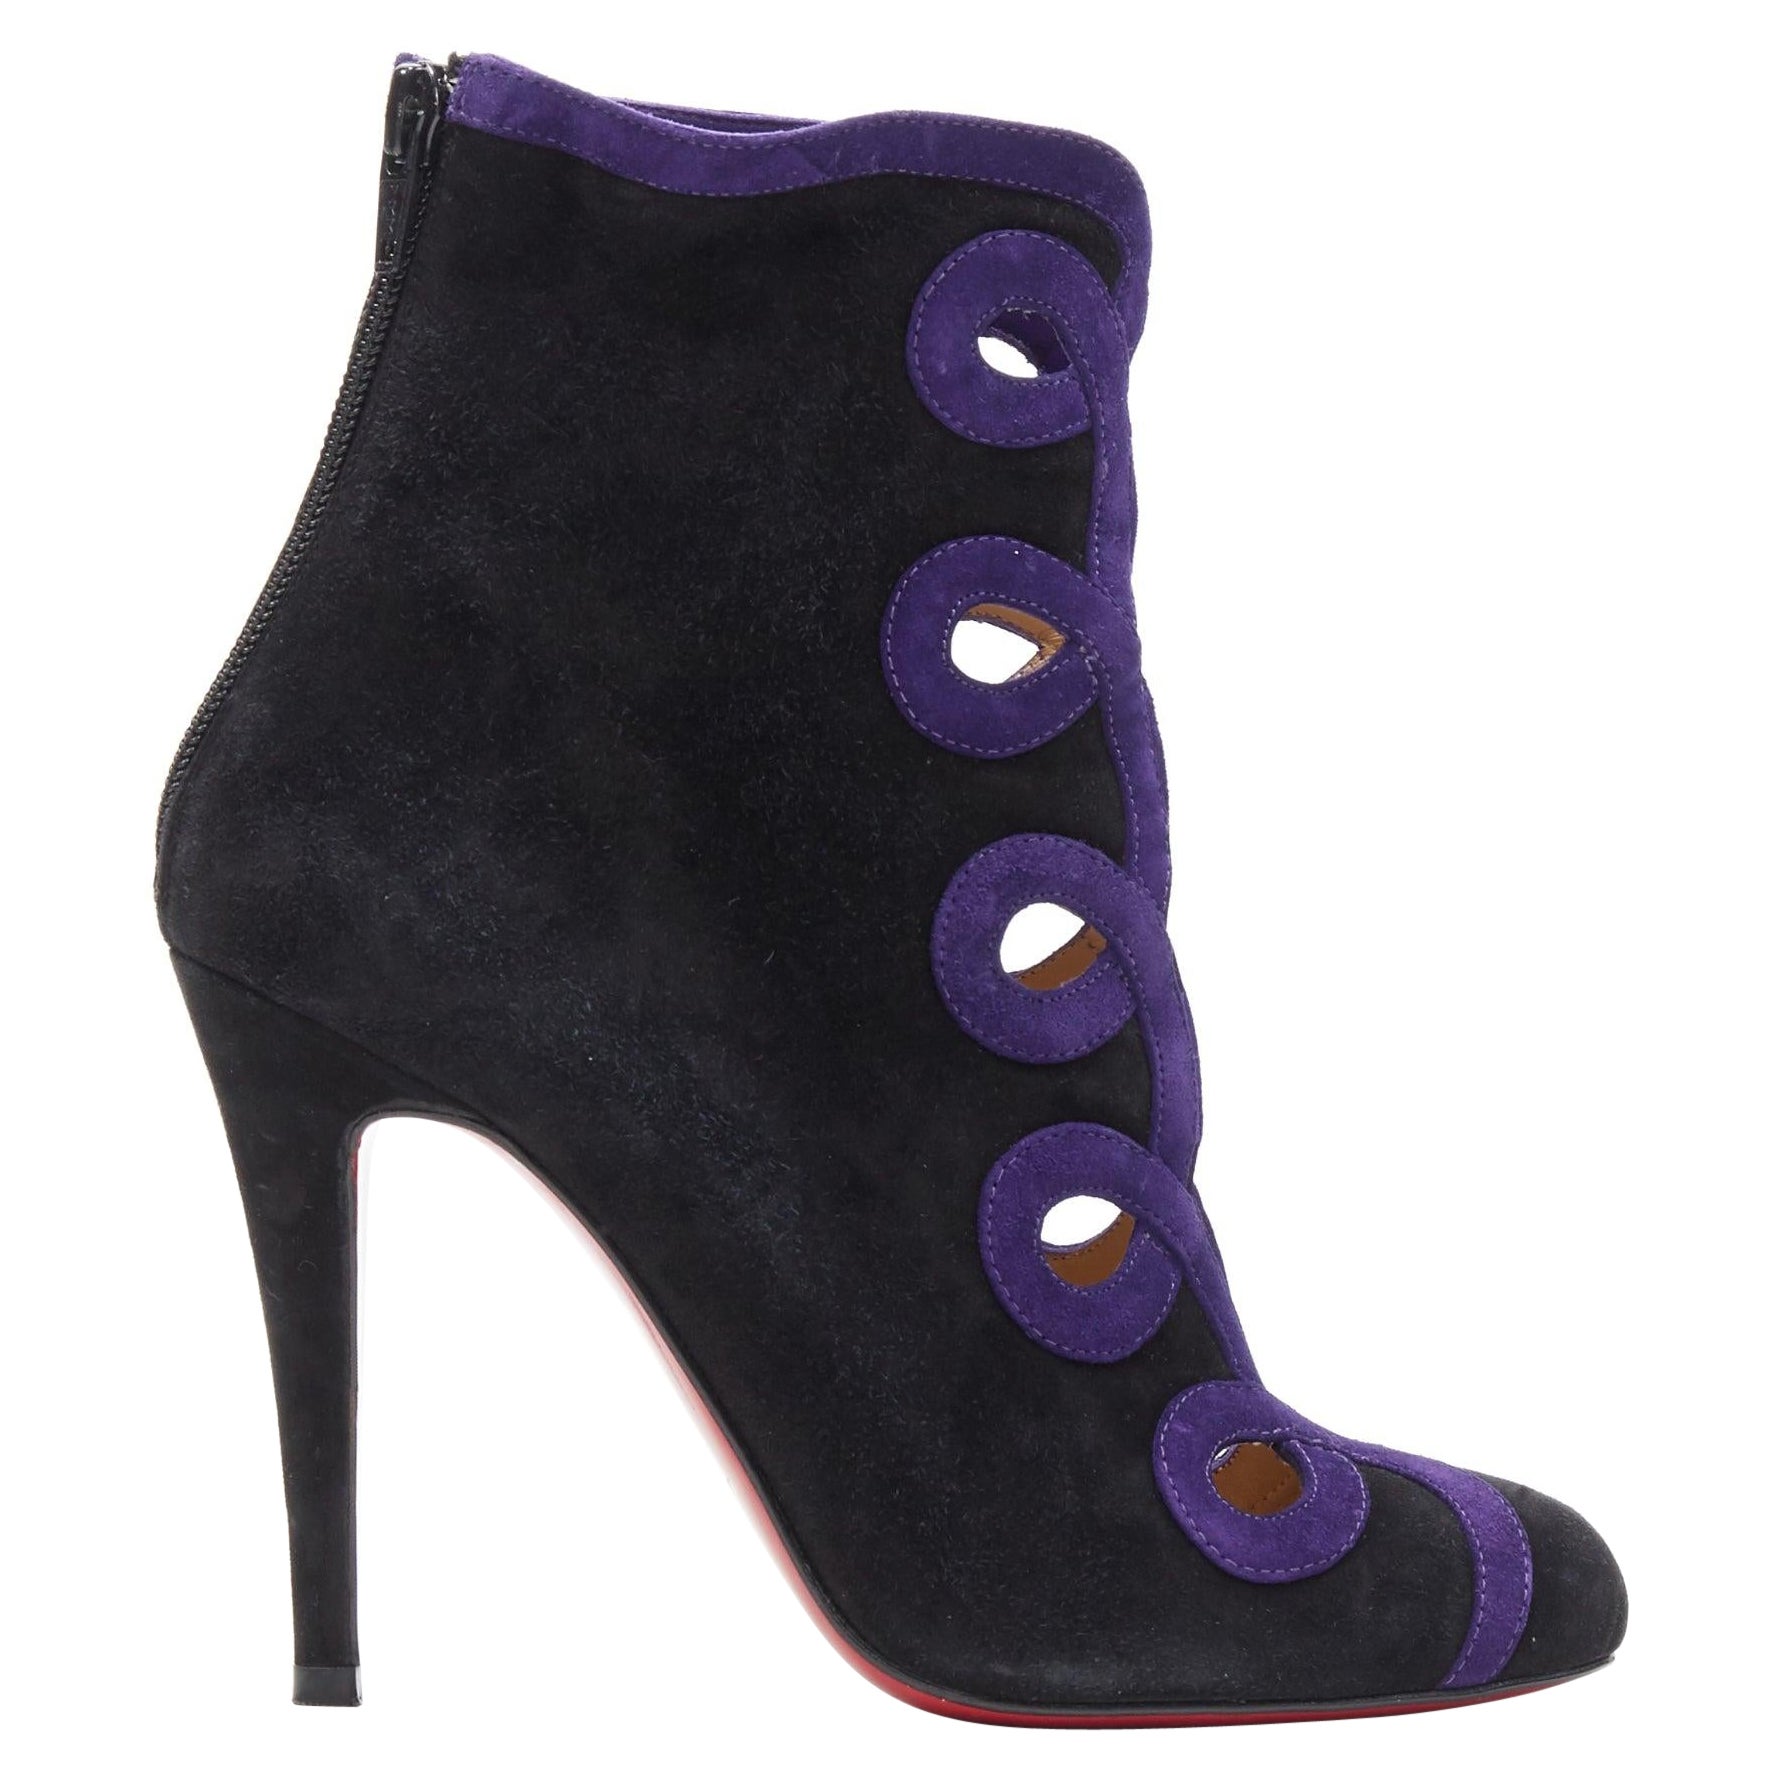 CHRISTIAN LOUBOUTIN black suede purple swirl cut out high heel ankle bootie EU36 For Sale